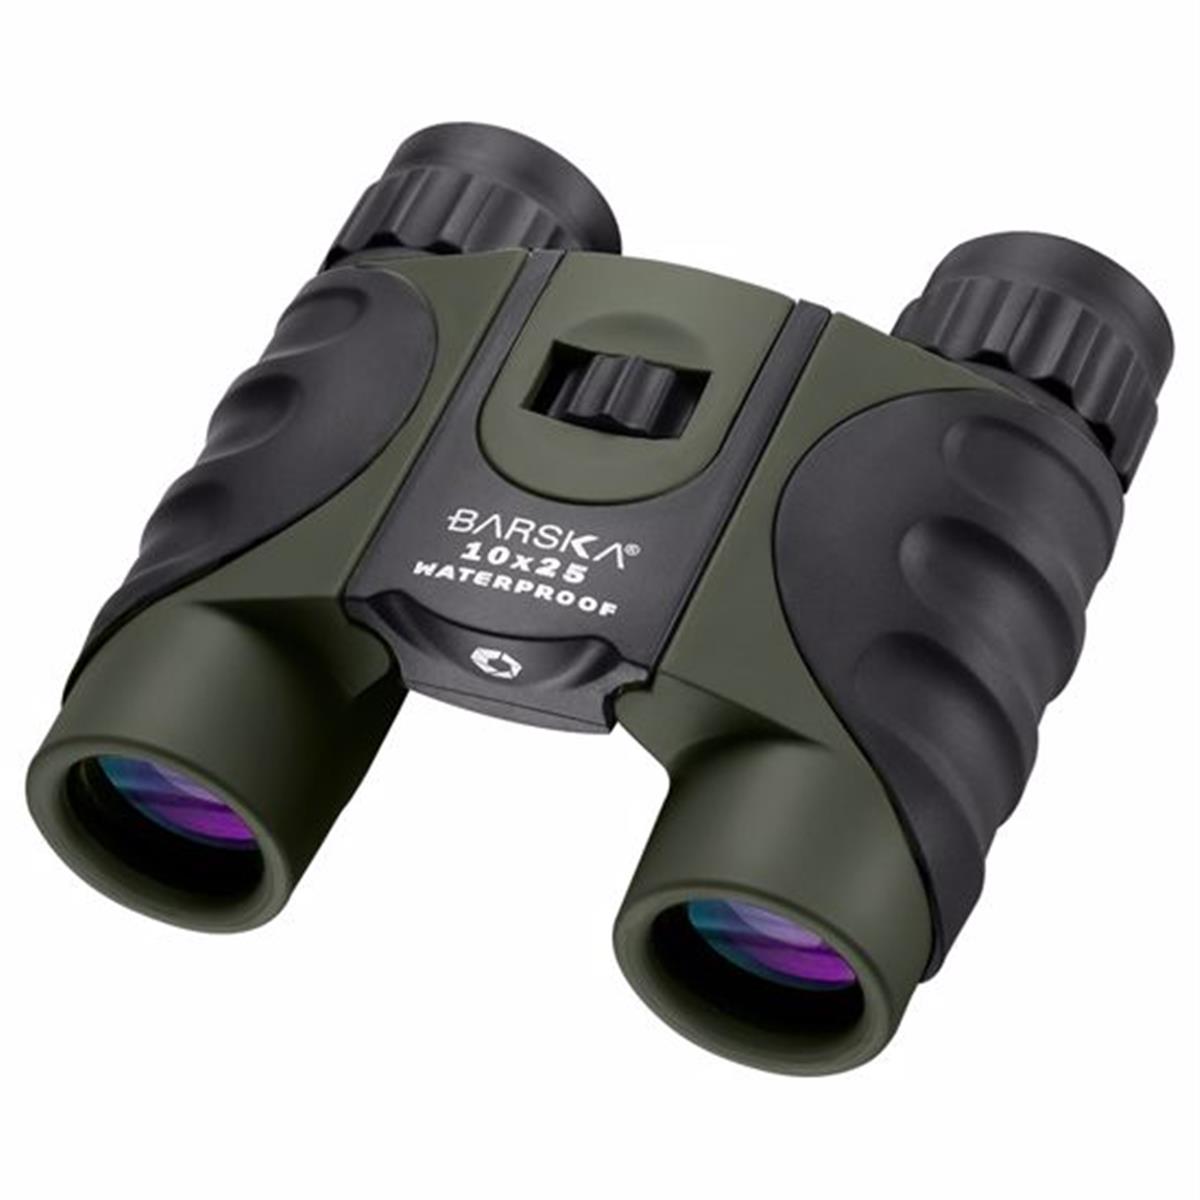 Picture of Barska AB12723 10 x 25 mm Waterproof Compact Binoculars with Blue Lens Clamshell Pack - Green